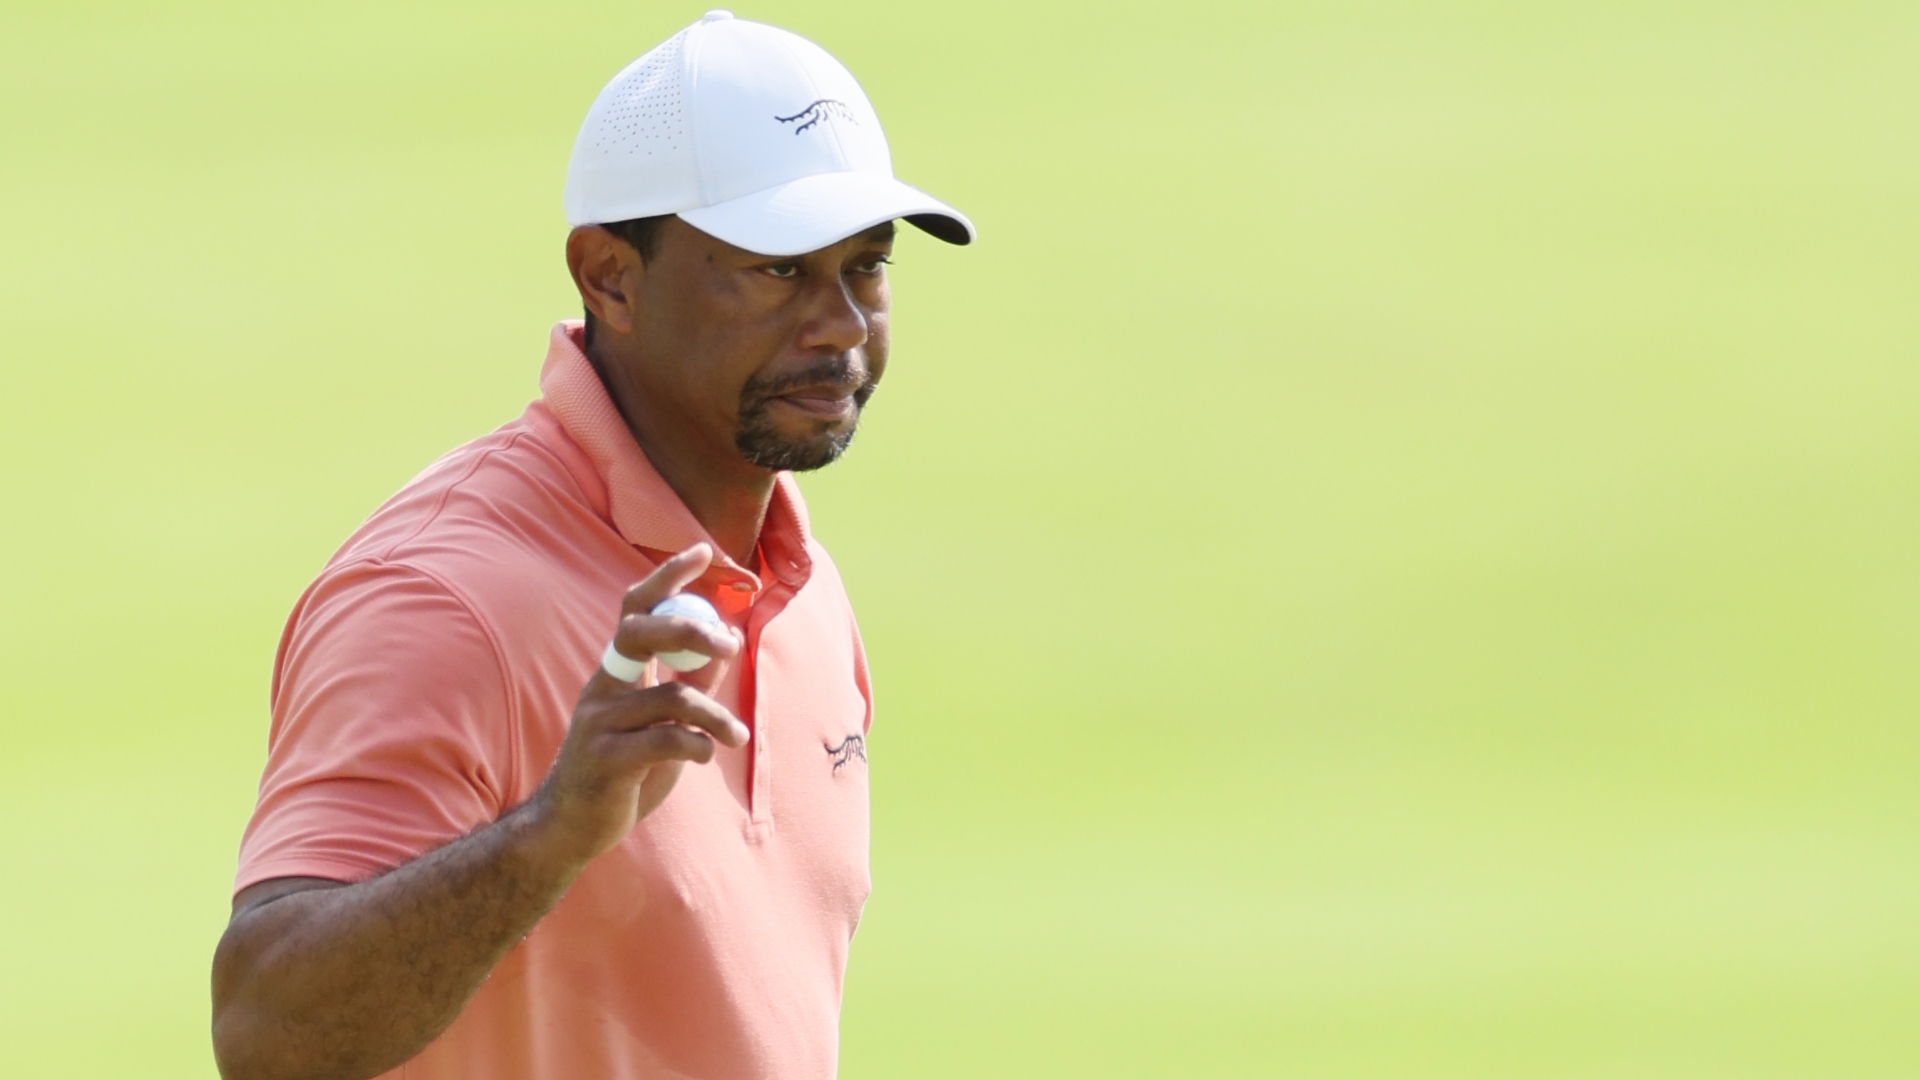 Tiger's great tee shot sets up birdie on Hole 3